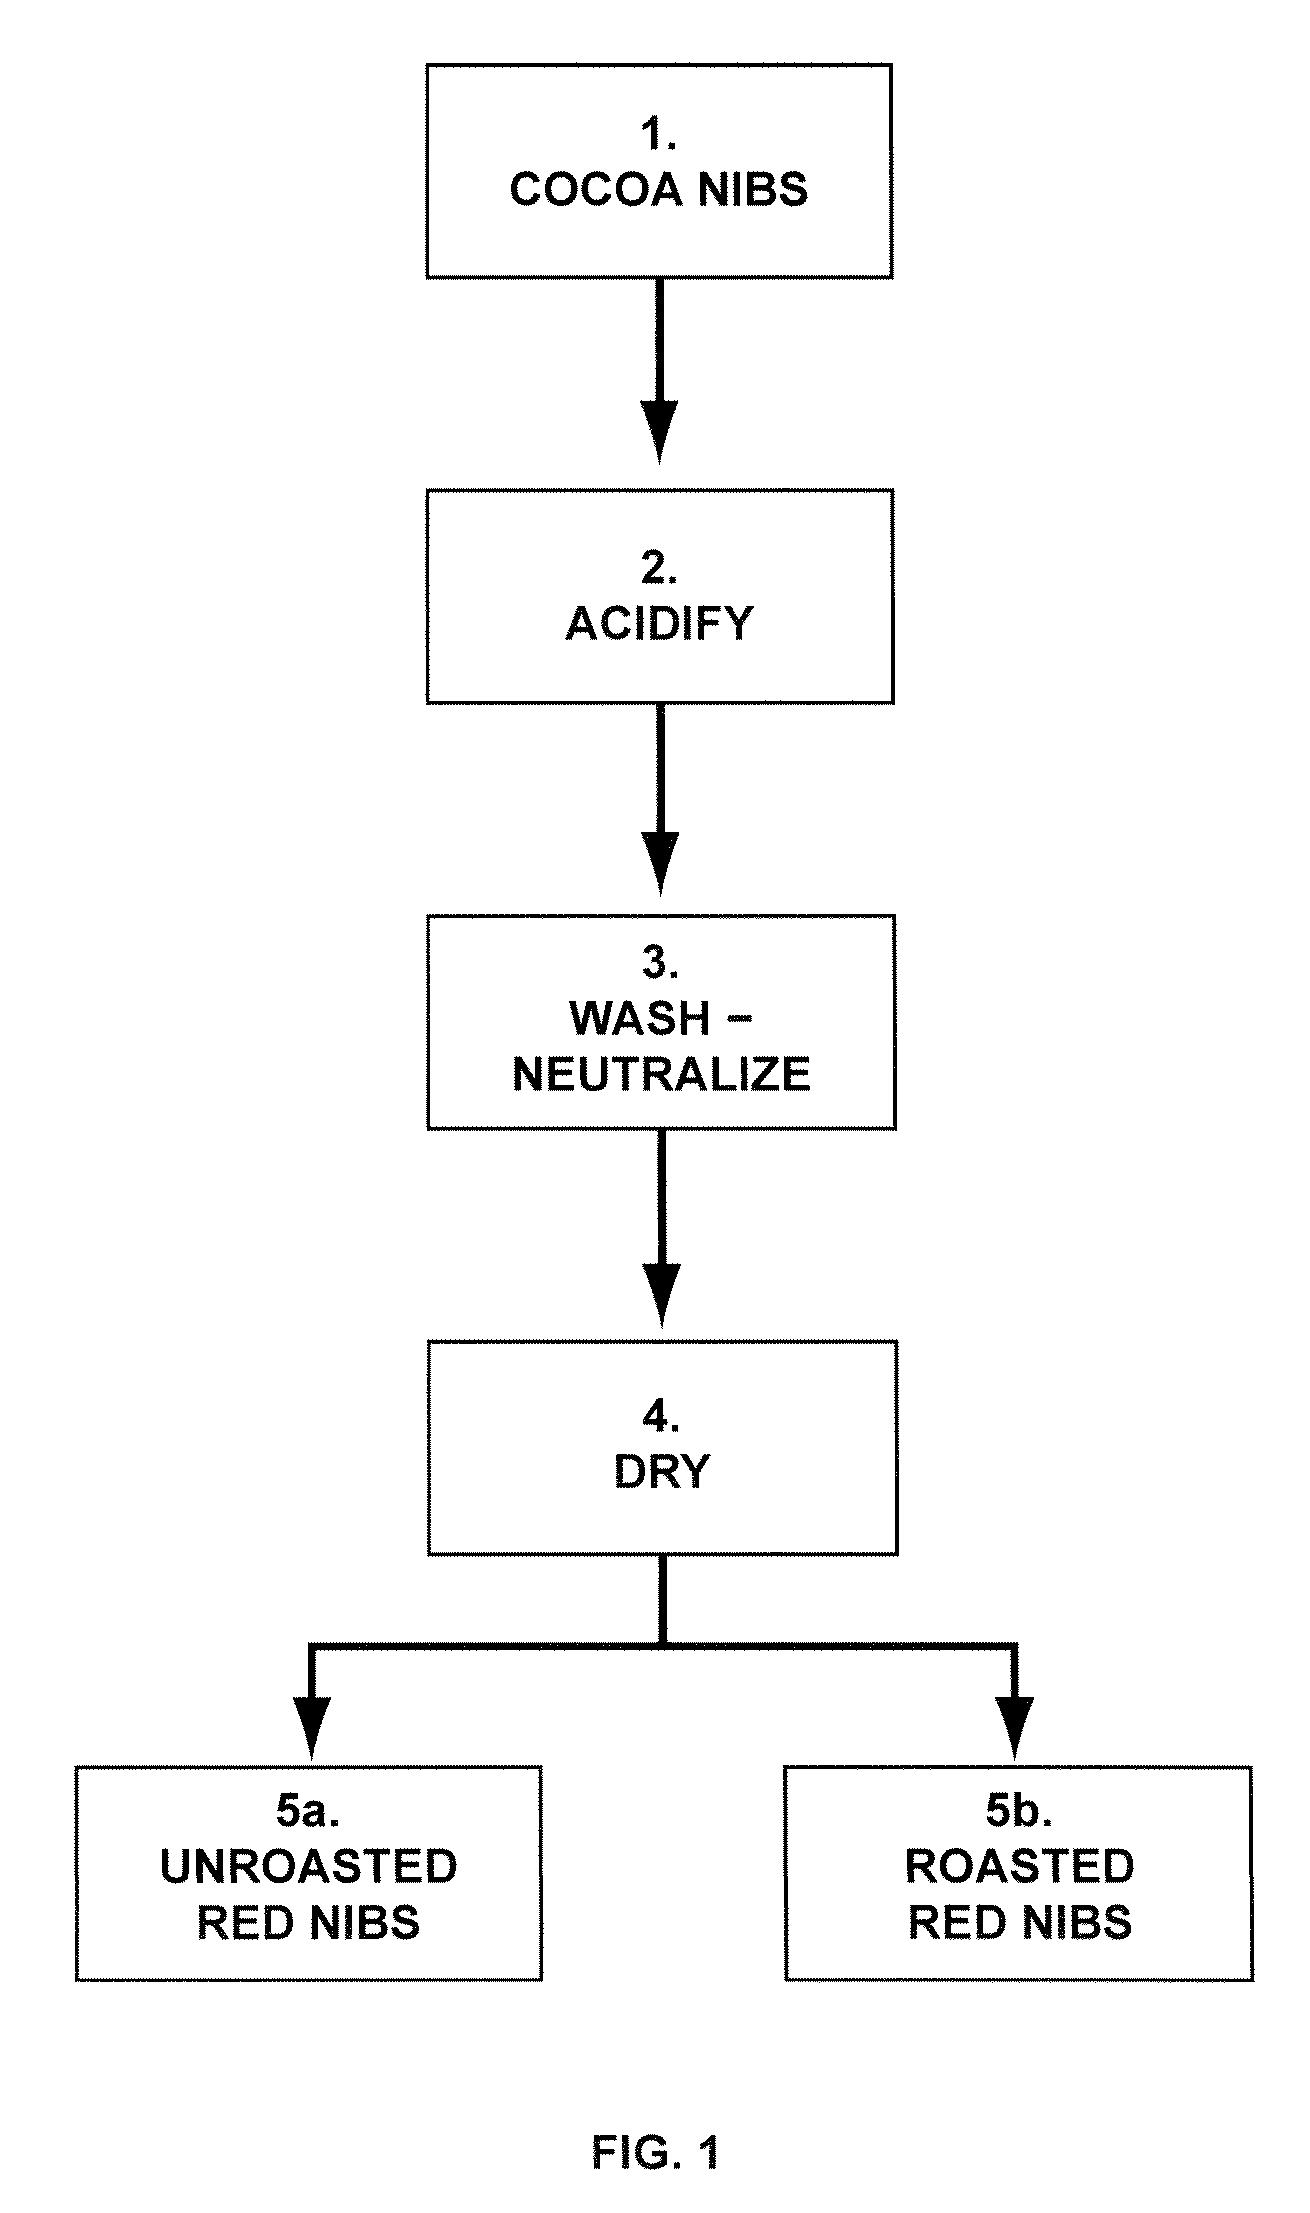 Process for preparing red cocoa ingredients, red chocolate, and food products